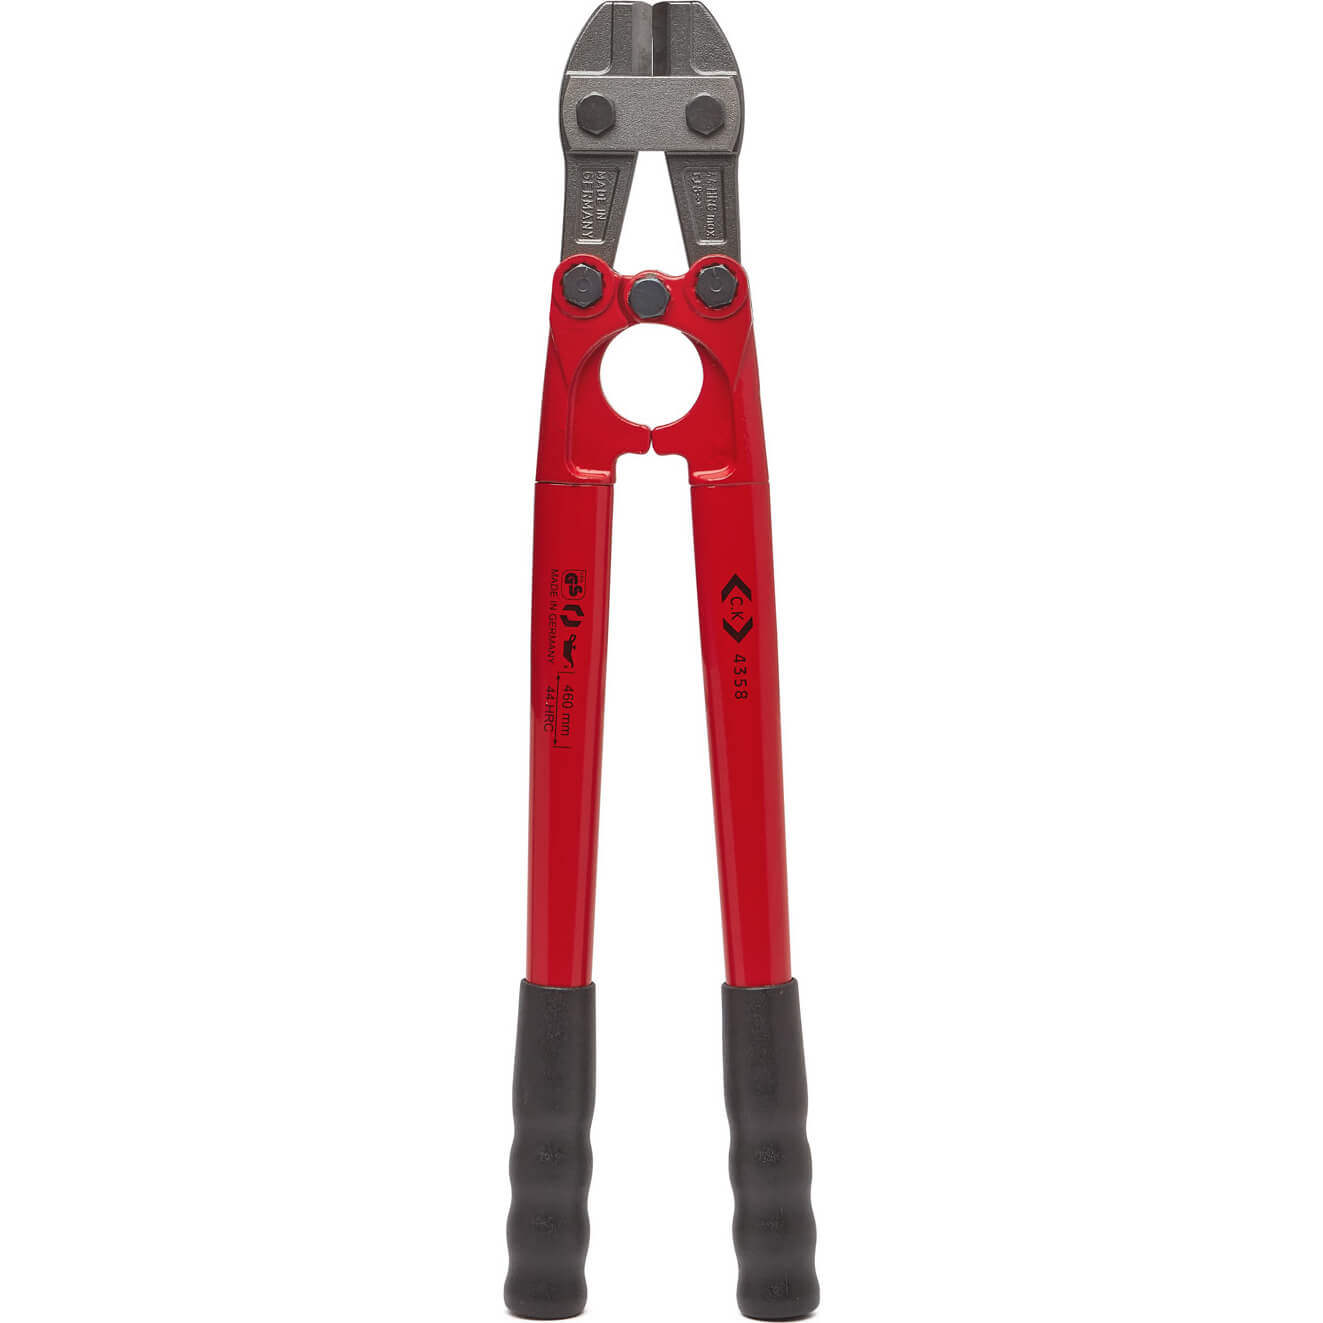 Image of CK Bolt Cutters 600mm